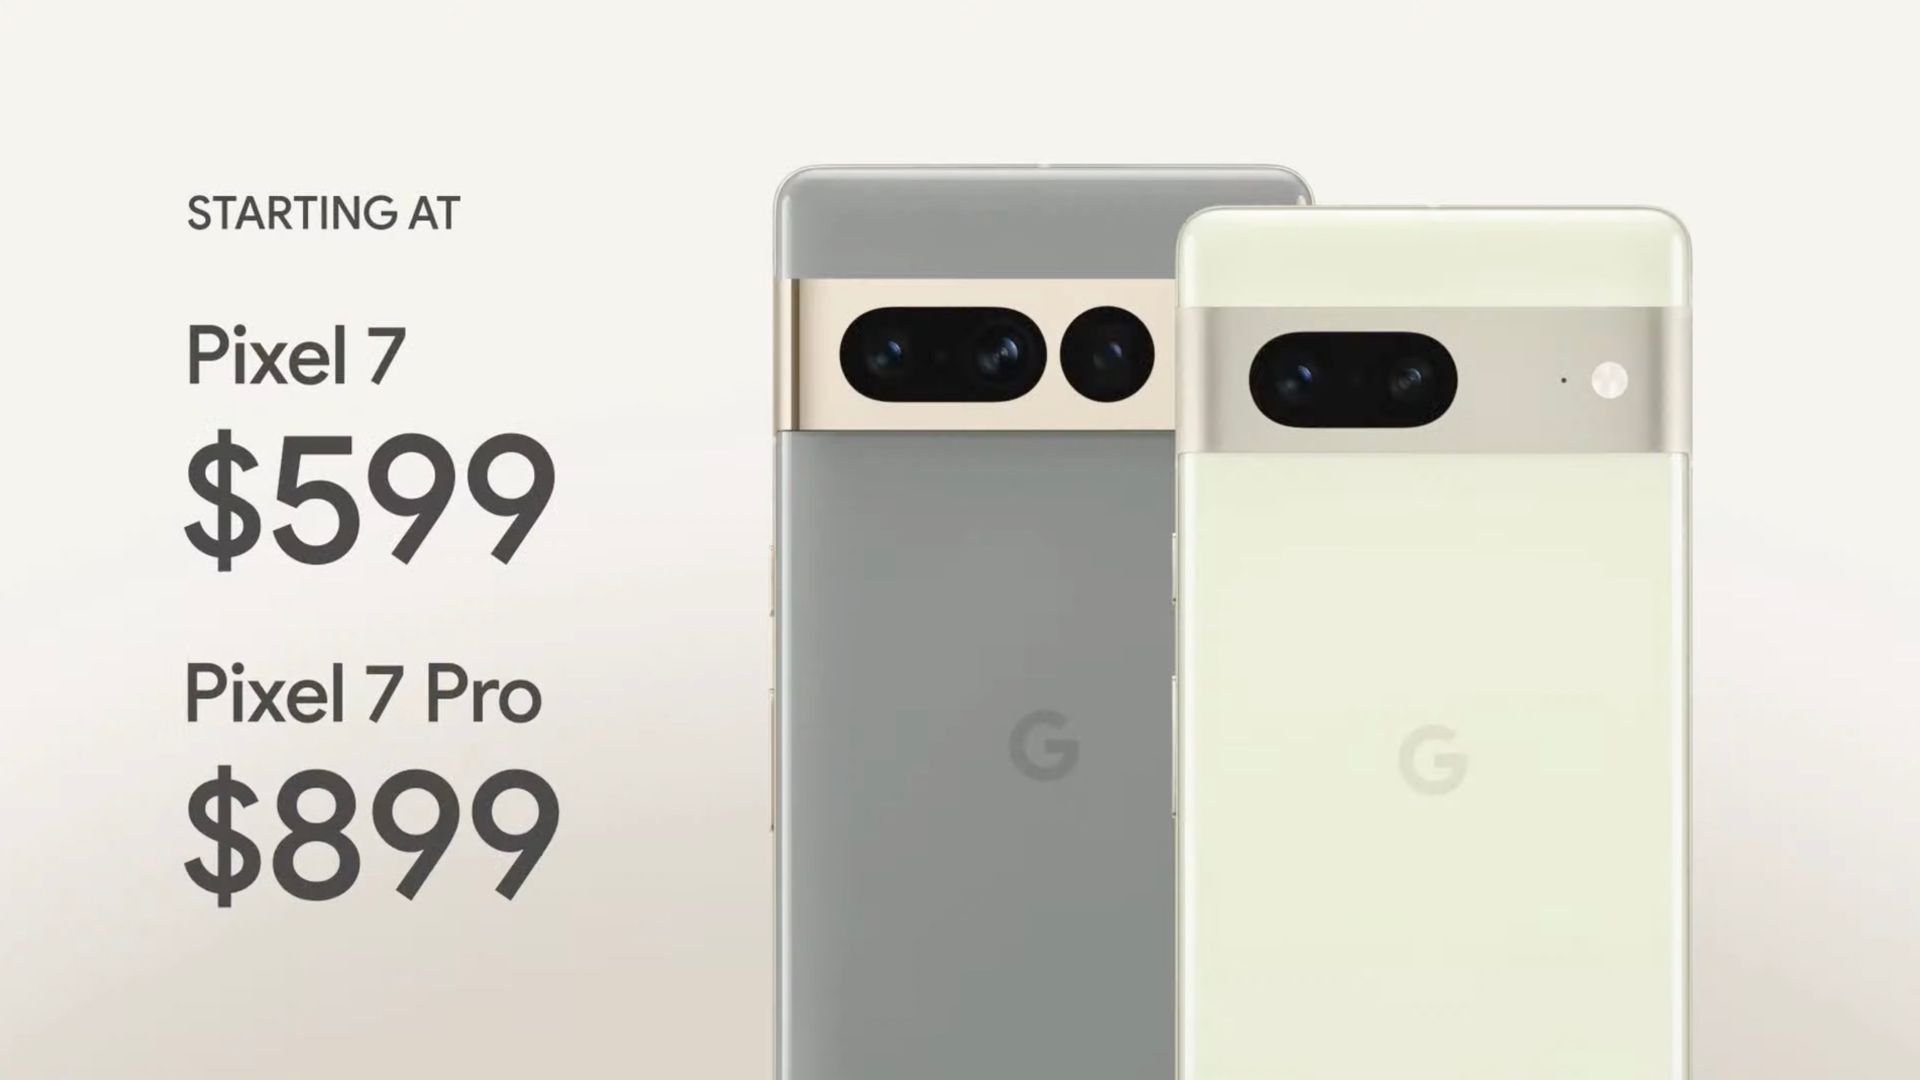 Pixel 7 and Pixel 7 Pro Pricing